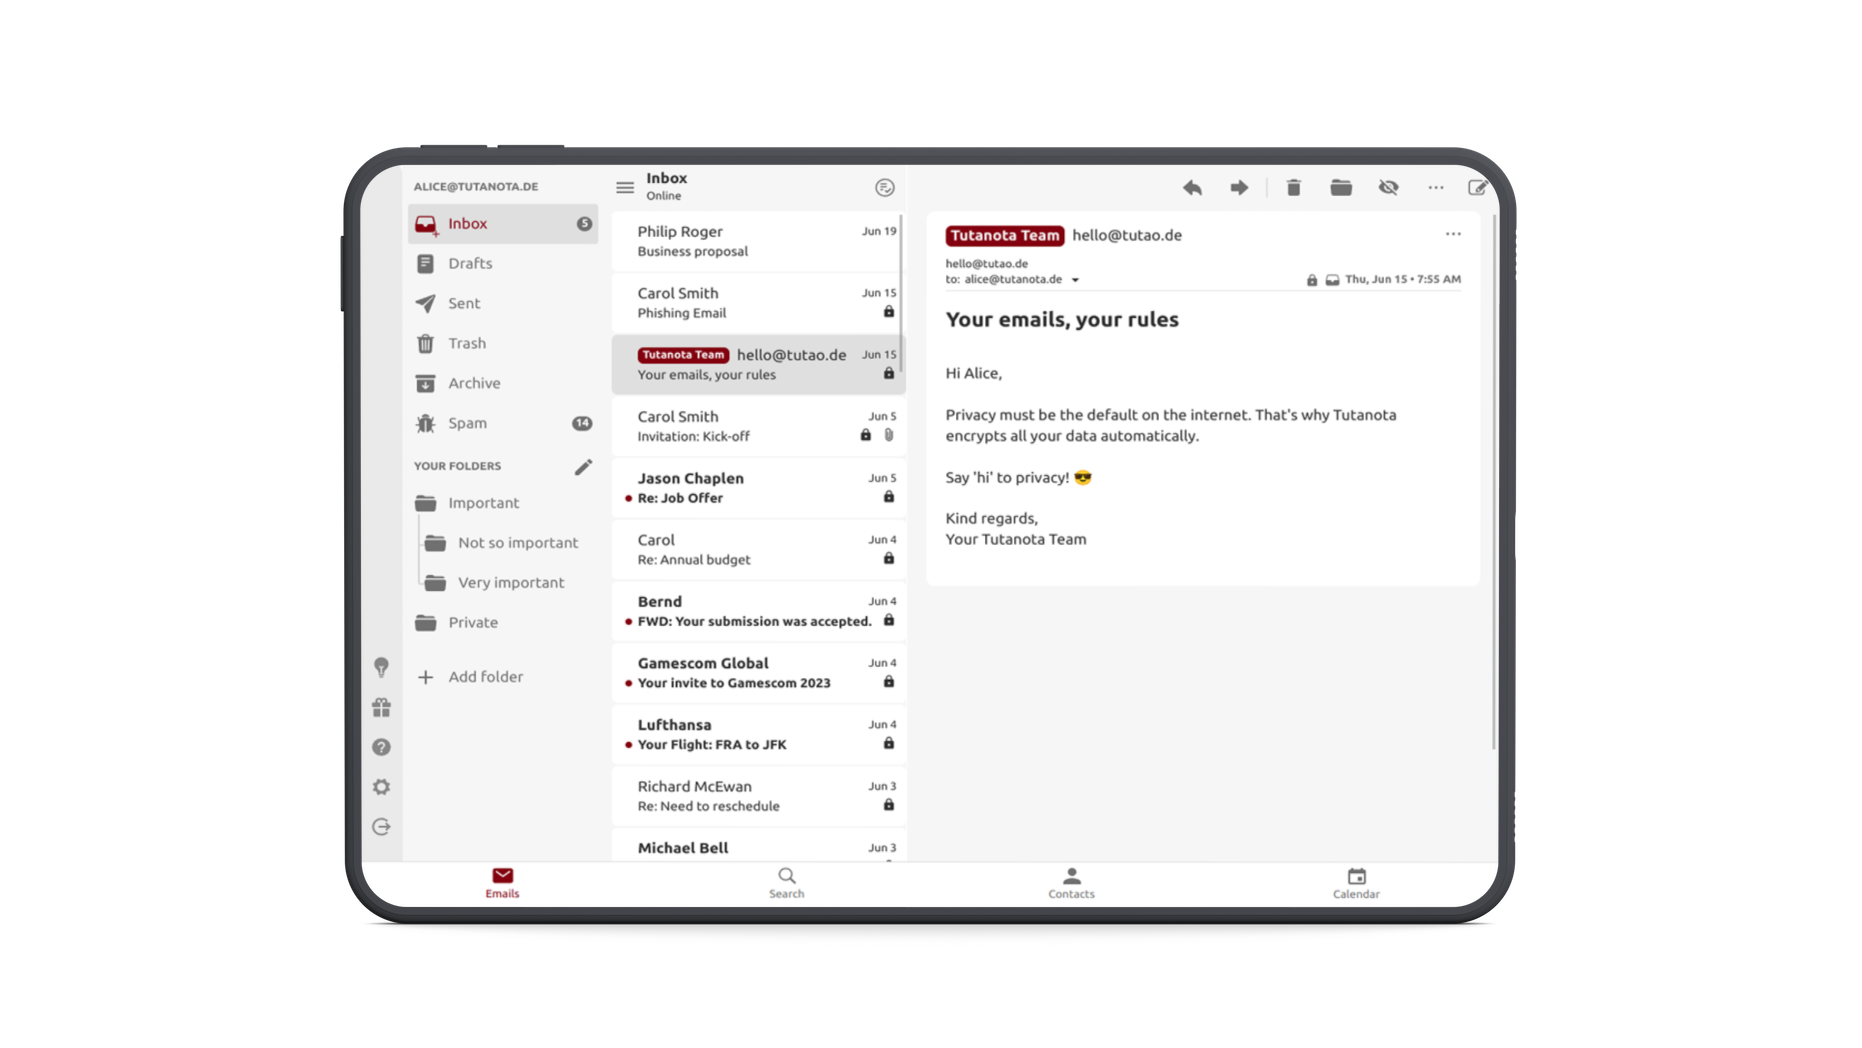 Email inbox shown in a horizontal orientation on a tablet